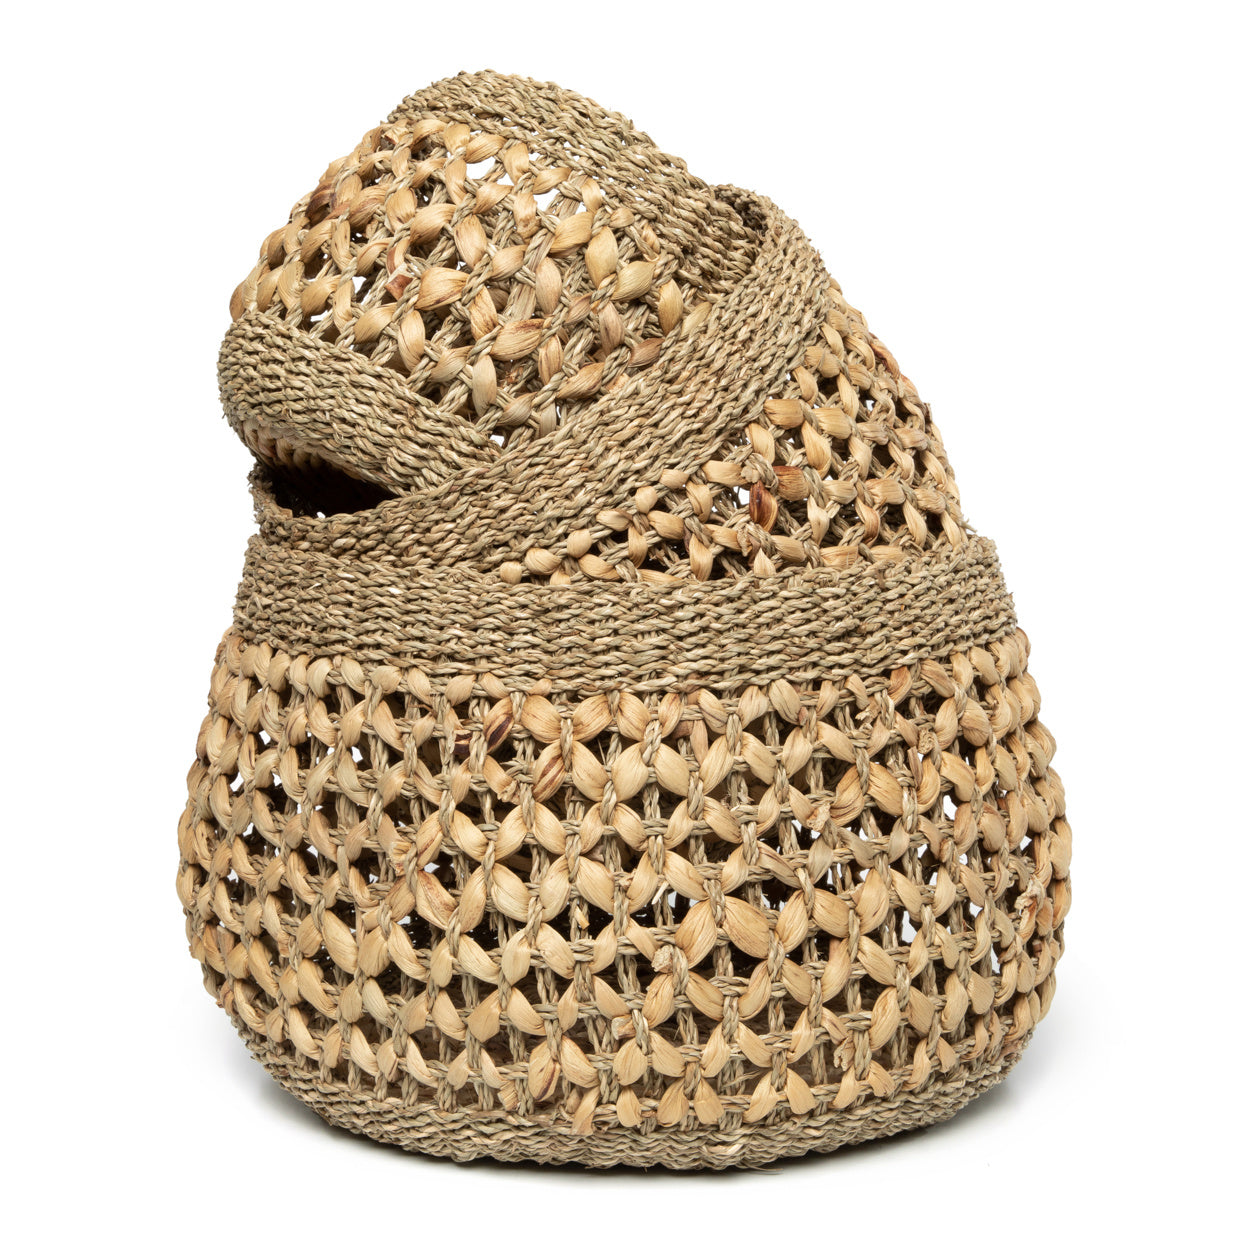 THE NHA TRANG Baskets Set of 3 folded side view